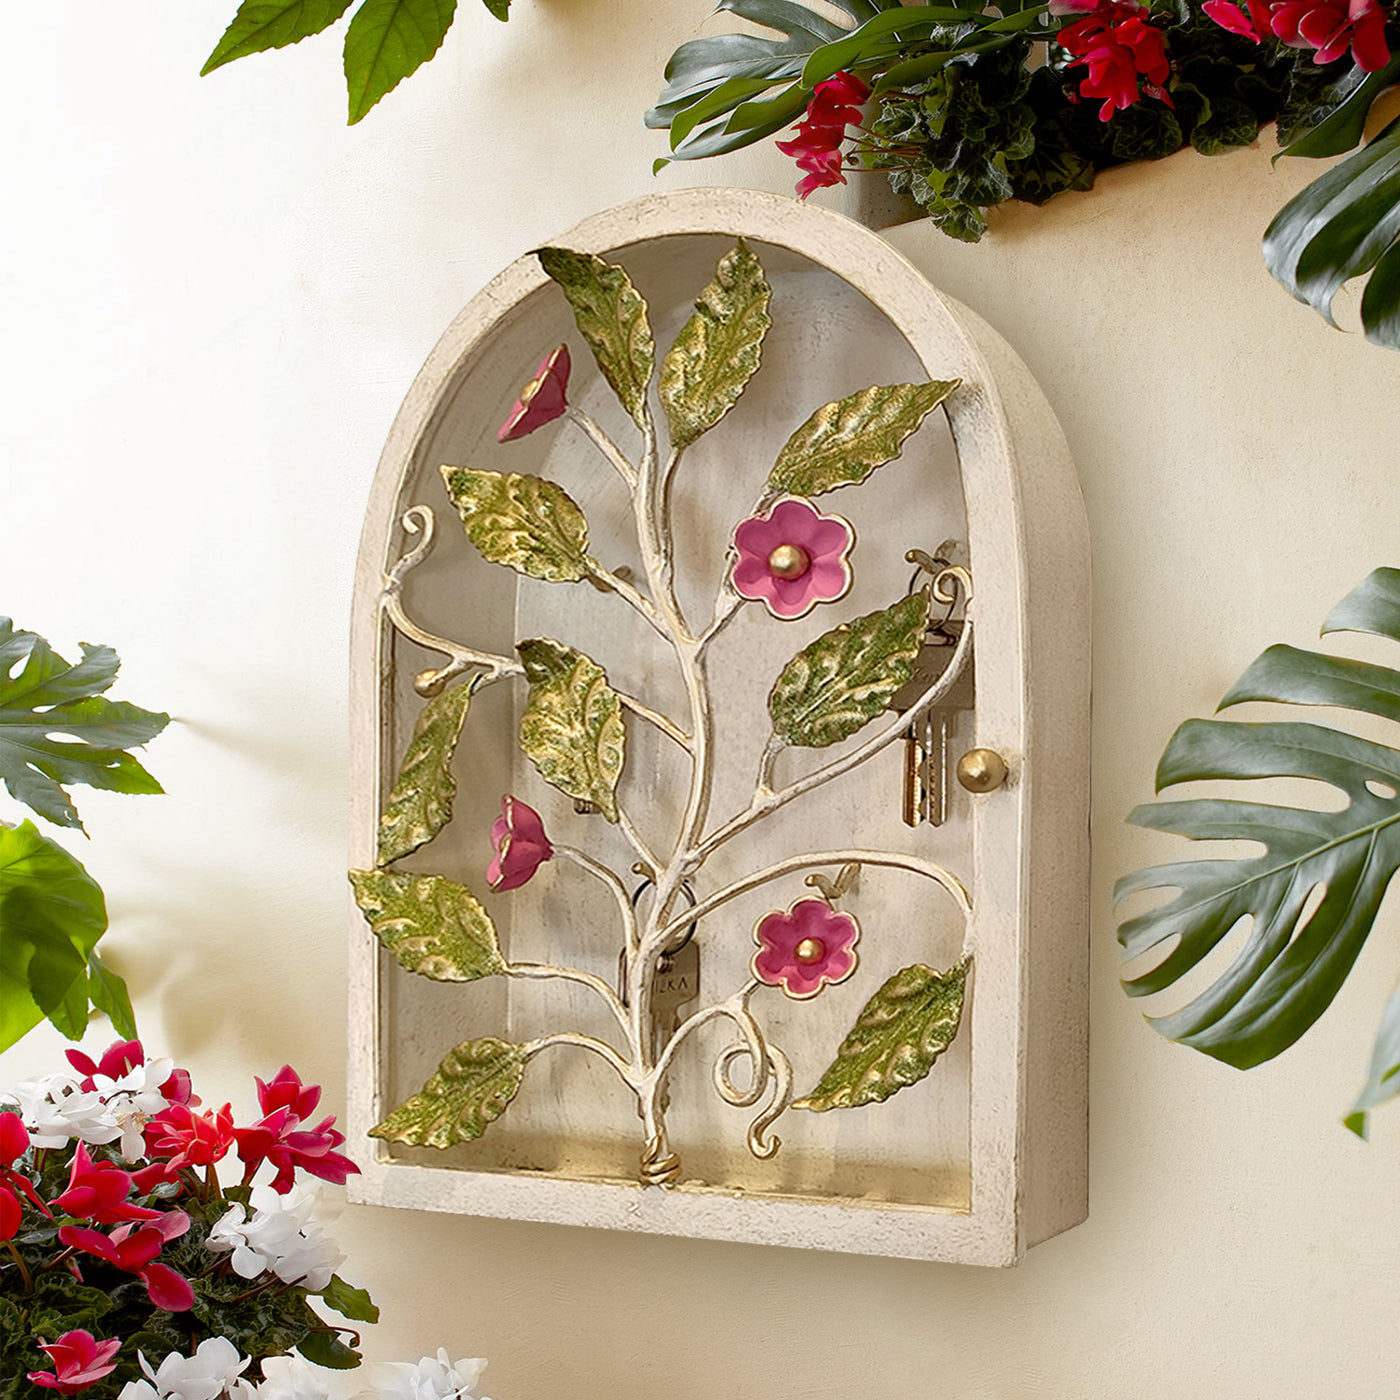 An arched decorative floral key storage box with green leaves and pink flowers